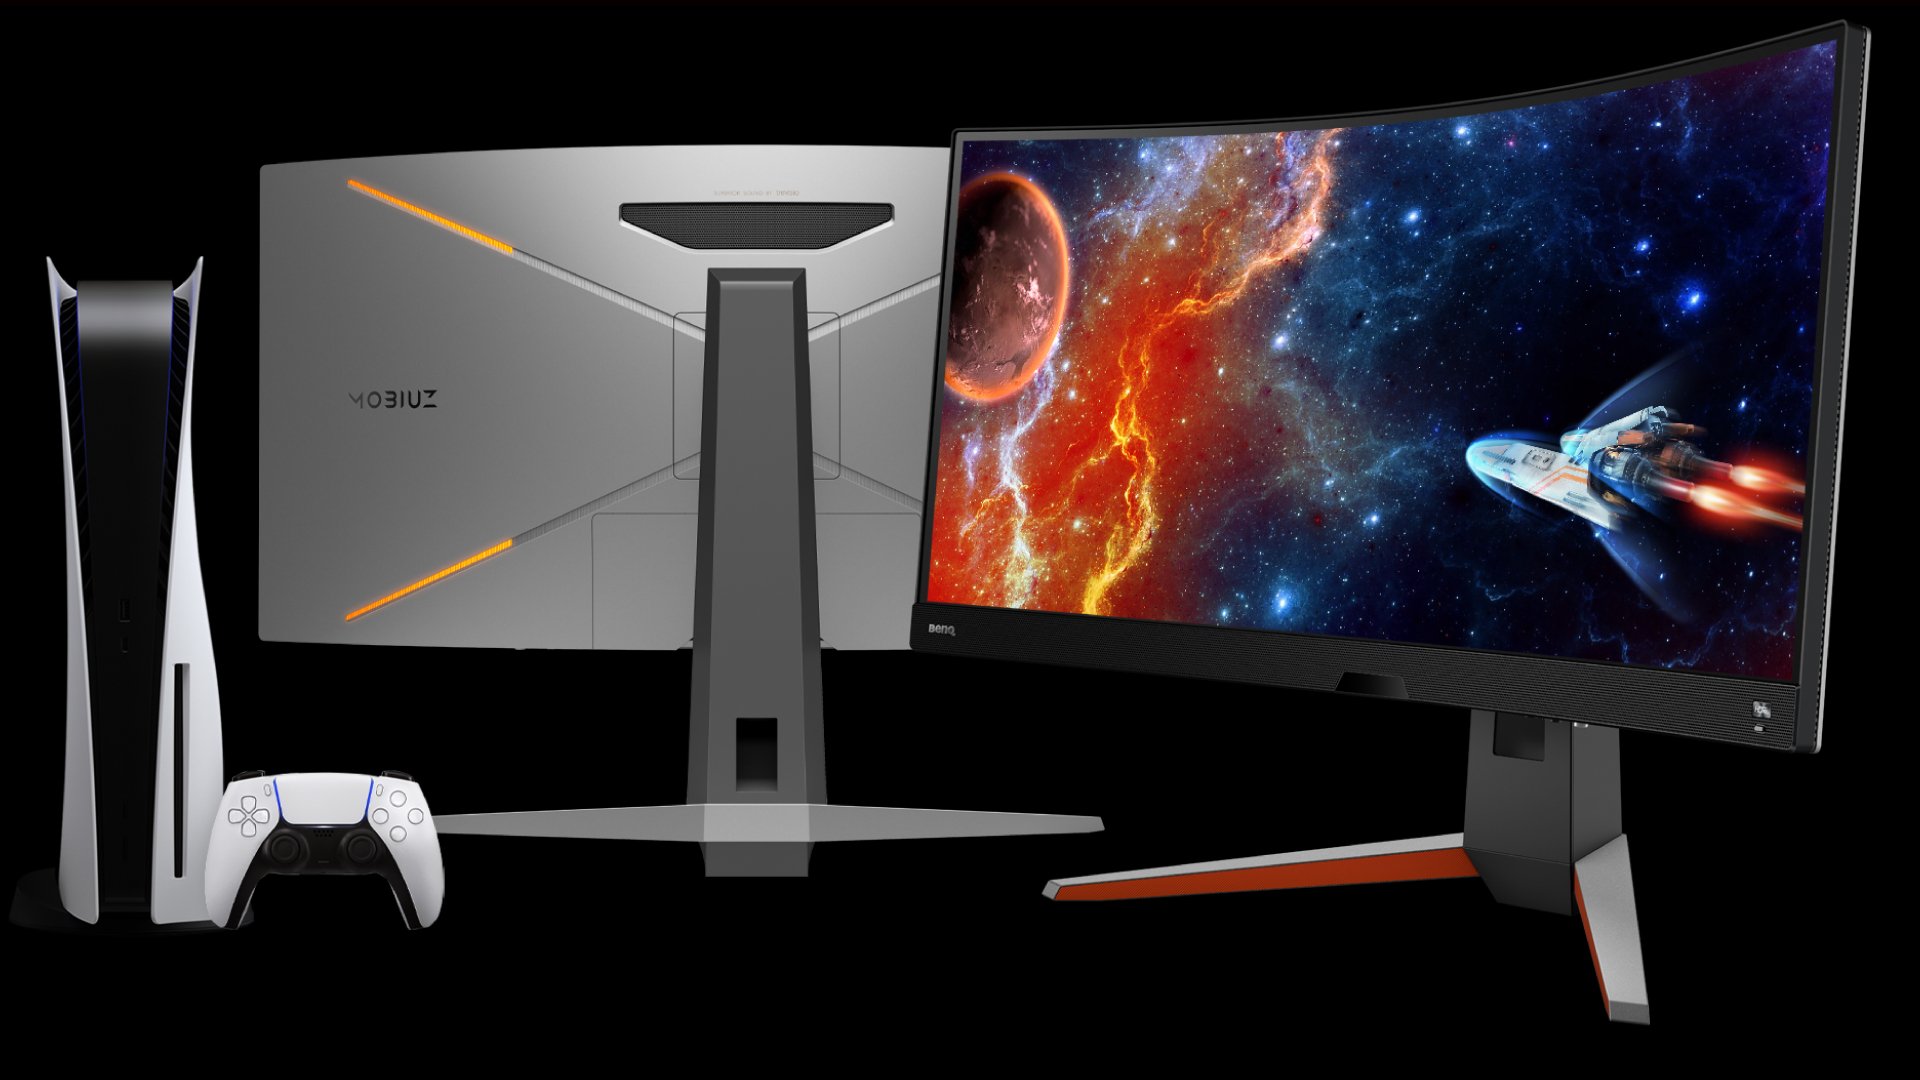 benq mobiuz ultrawide curved gaming monitor ex3410r imagine a new reality